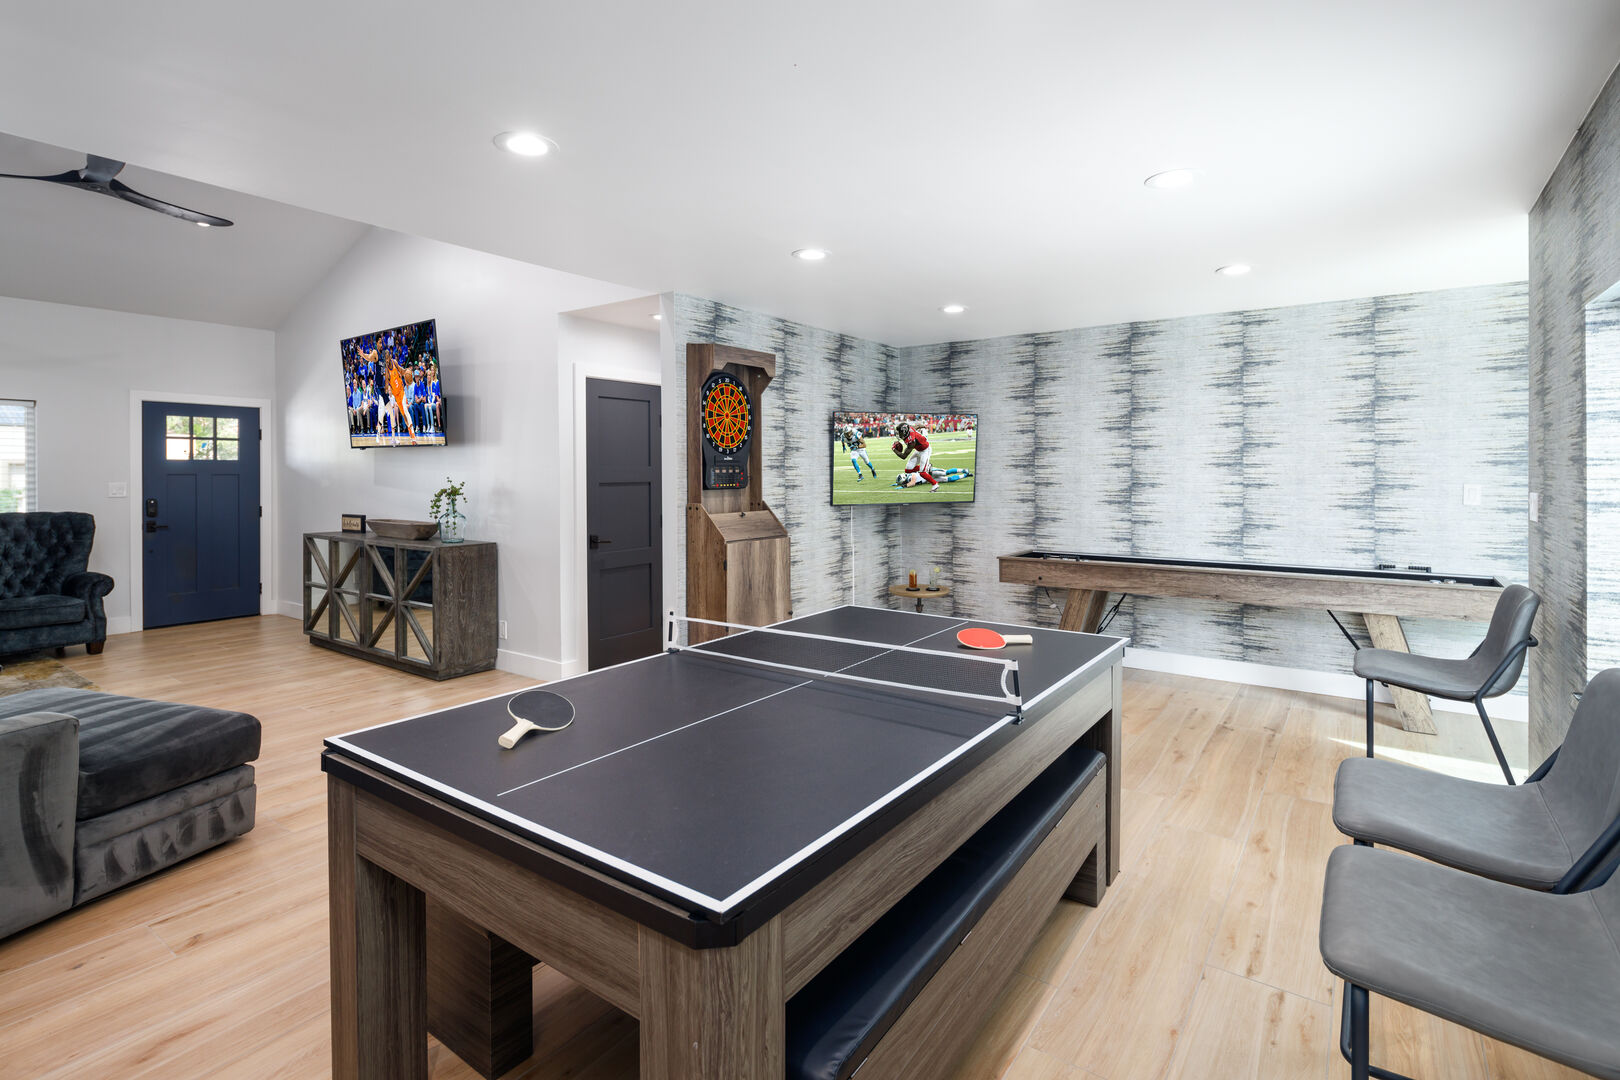 Formal dining area converts to game room! Table can be changed to pool table or ping-pong! Also features shuffle board, smart TV, and dart board!